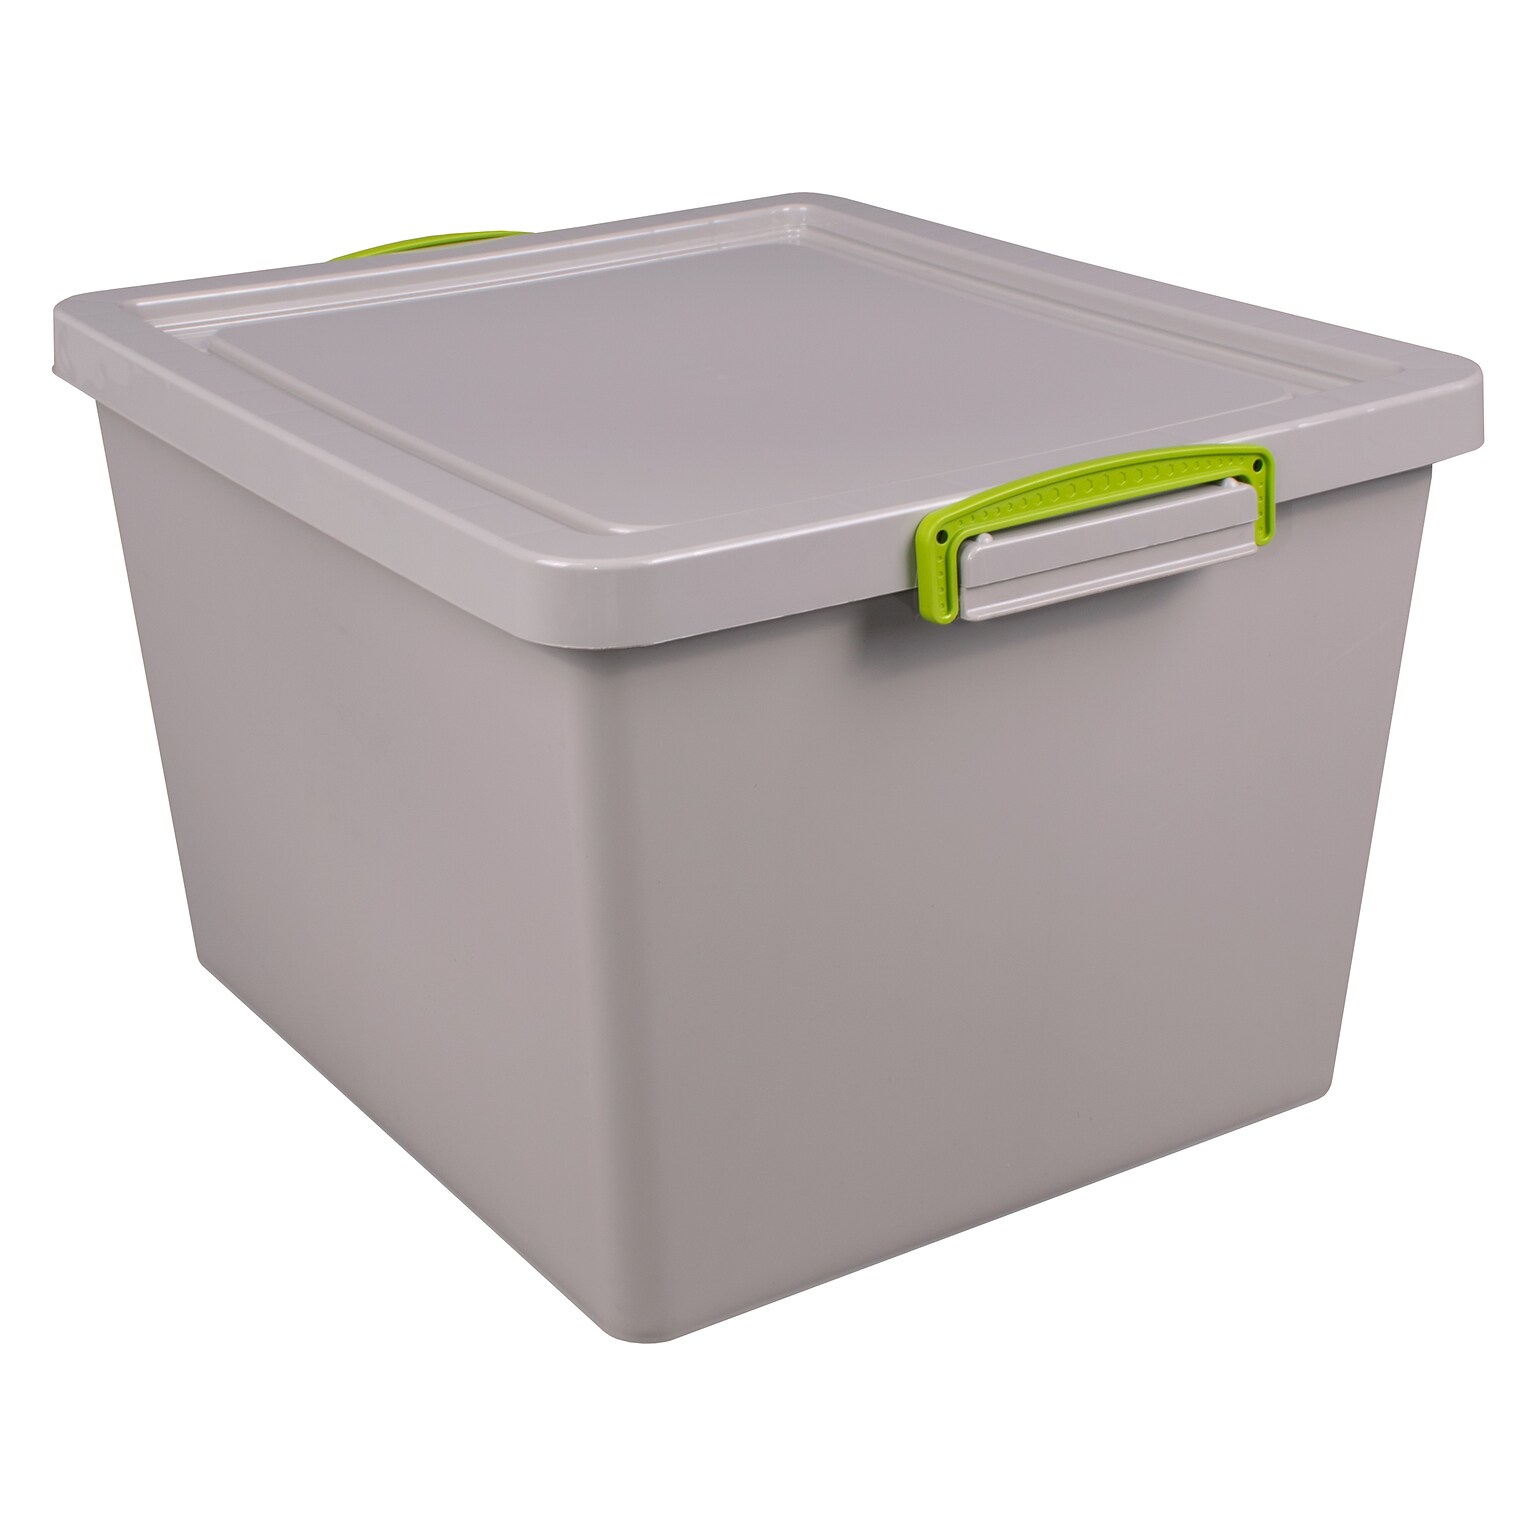 Really Useful Box 35.4 Qt. Latch Lid Storage Tote, Dove Gray (33.5PSTL-RECY-GREY)